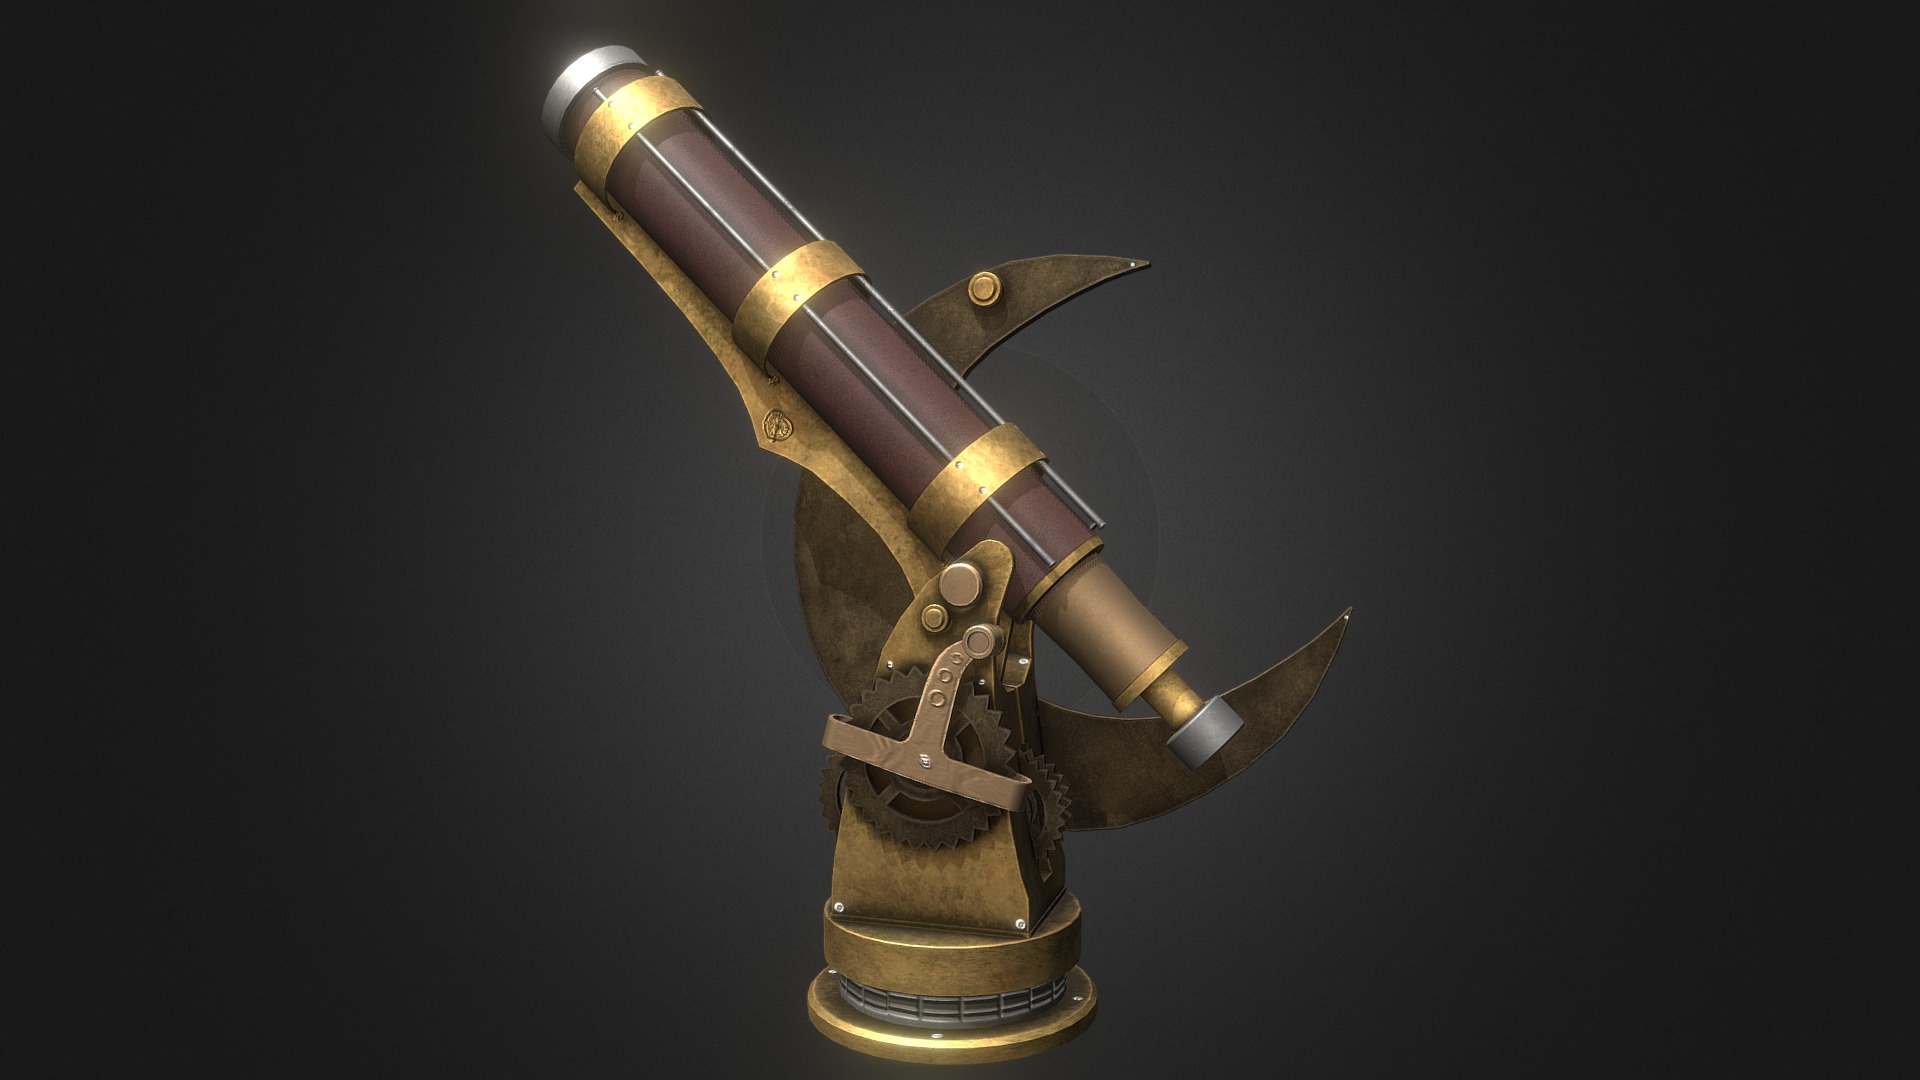 3D model Gallifreyan Telescope - This is a 3D model of the Gallifreyan Telescope. The 3D model is about a gold and silver sword.